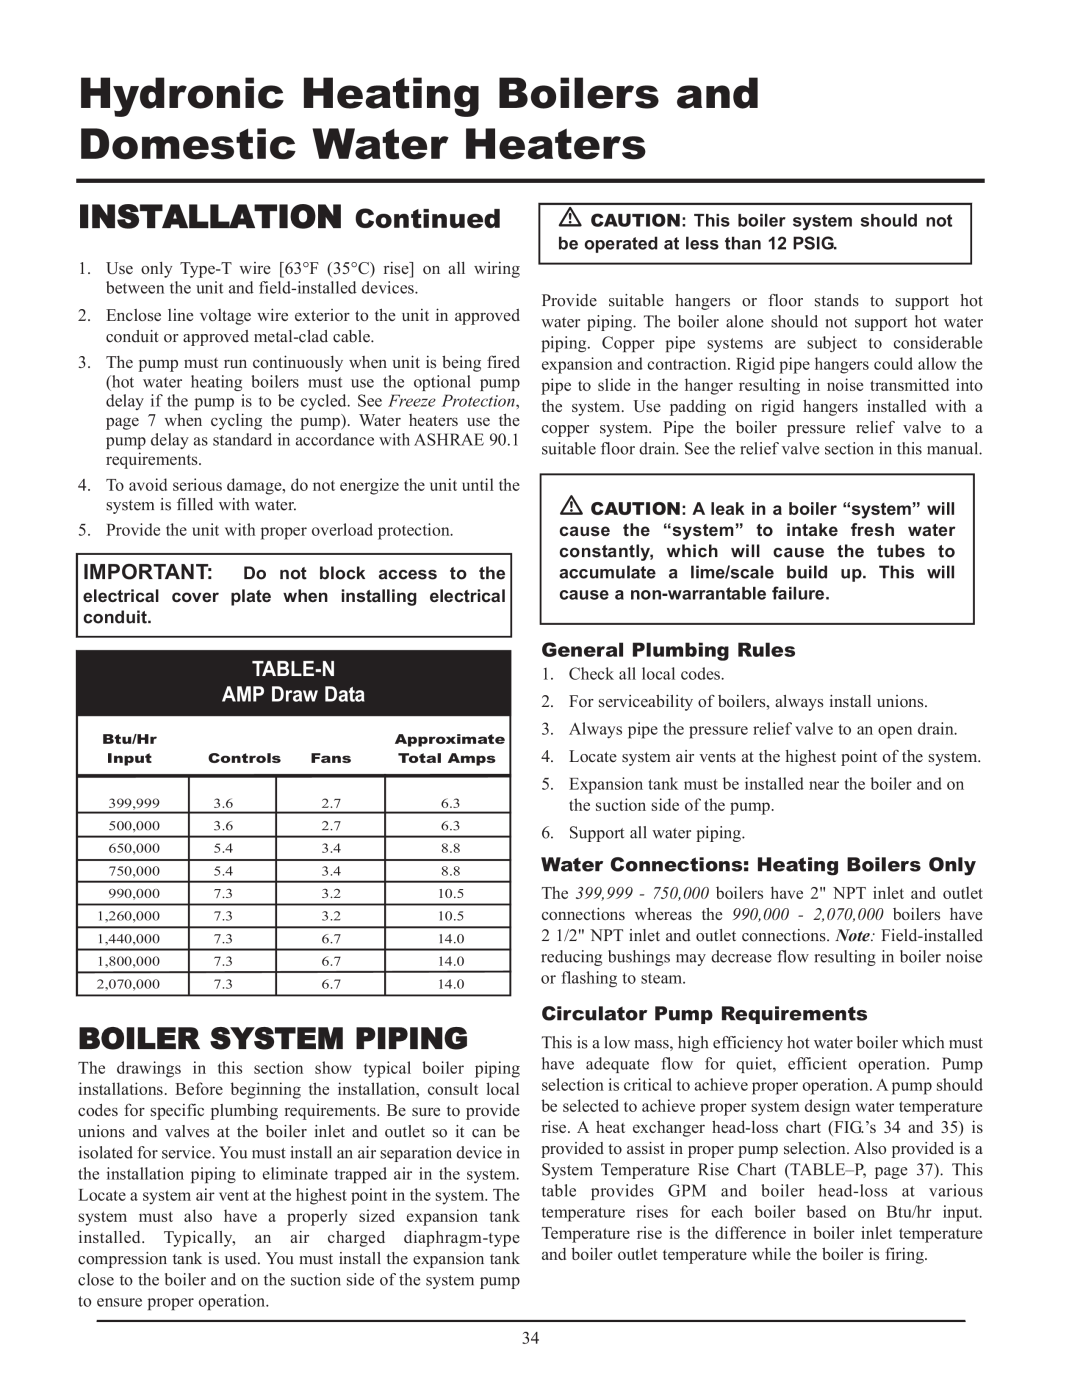 Lochinvar CF-CH(E)-i&s-08, 399 Boiler System Piping, TABLE-N AMP Draw Data, General Plumbing Rules, INSTALLATION Continued 